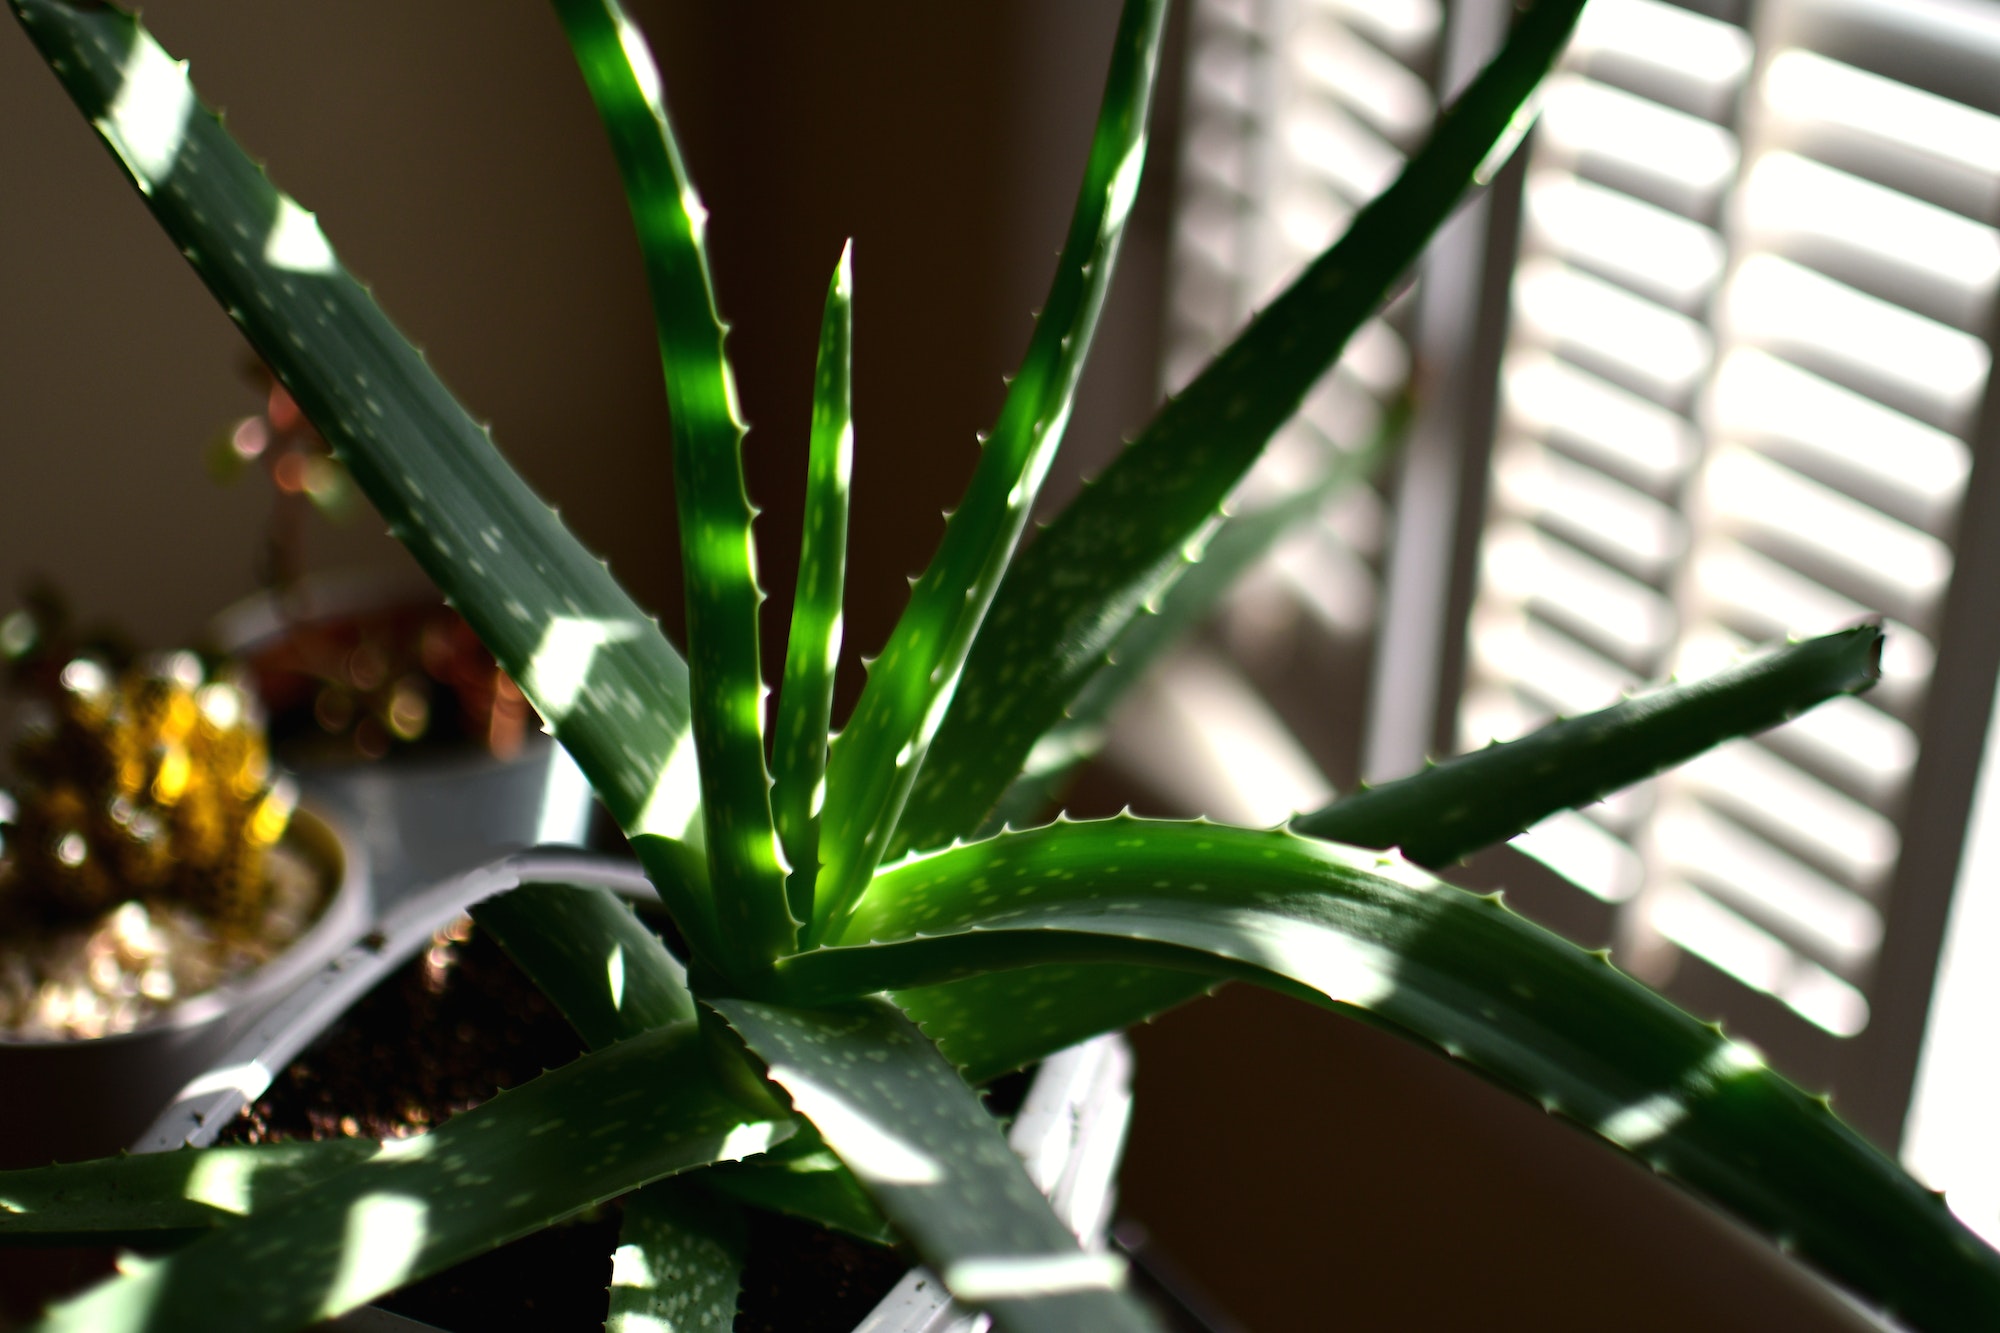 Aloe plant in the early morning sunlight filtering through plantation shutters blinds.